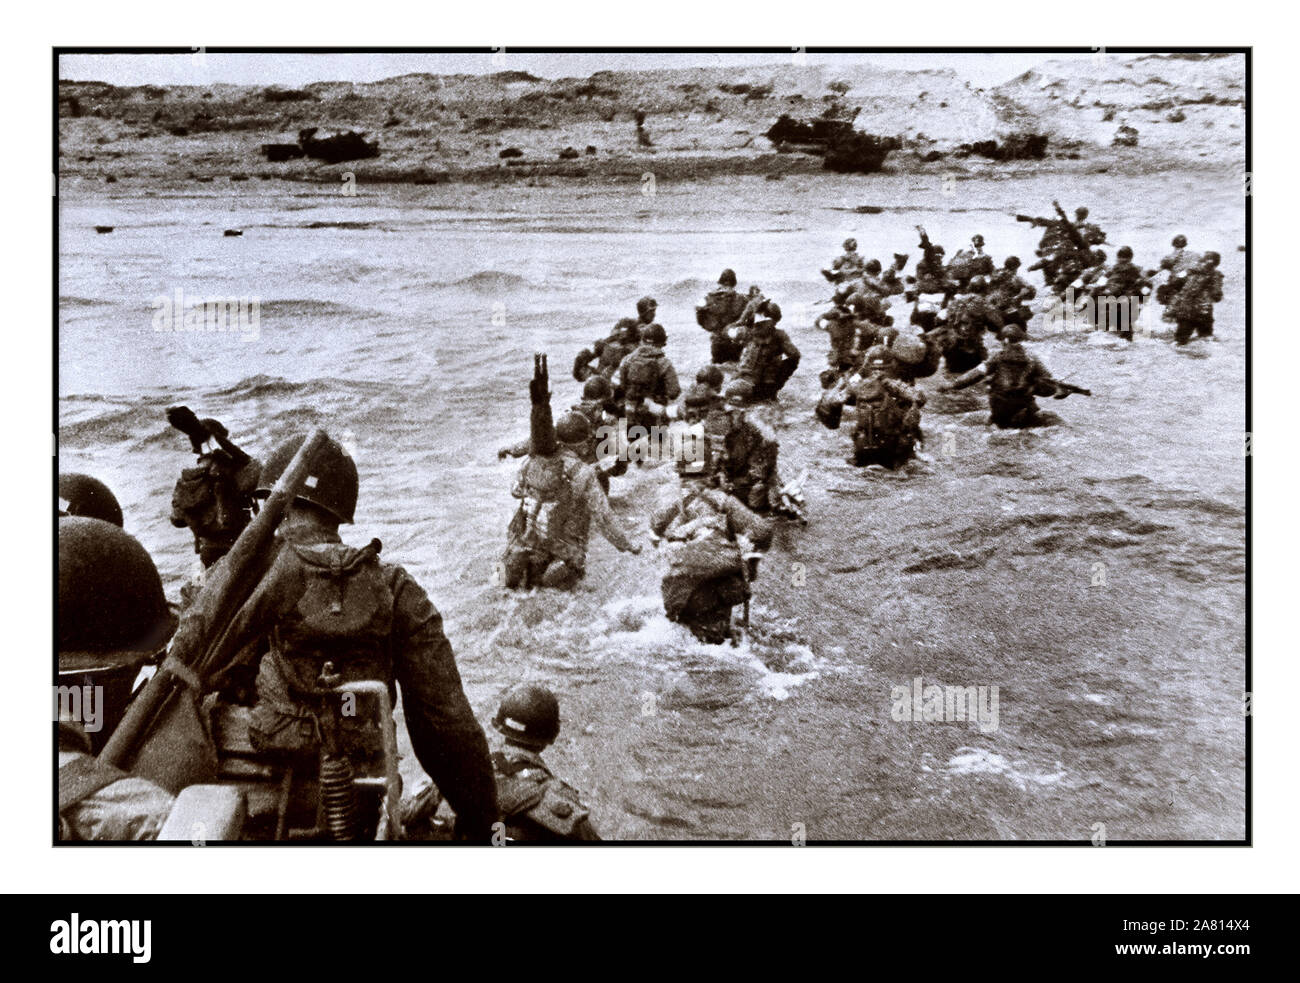 UTAH BEACH, FRANCE:  US American troops disembark from landing crafts and wade ashore under heavy intrenched Nazi fire during D-Day 06 June 1944. Allied forces stormed the Normandy beaches. The Allied landing in Normandy led to the liberation of France which marked the turning point in the Western theater of World War II. Stock Photo